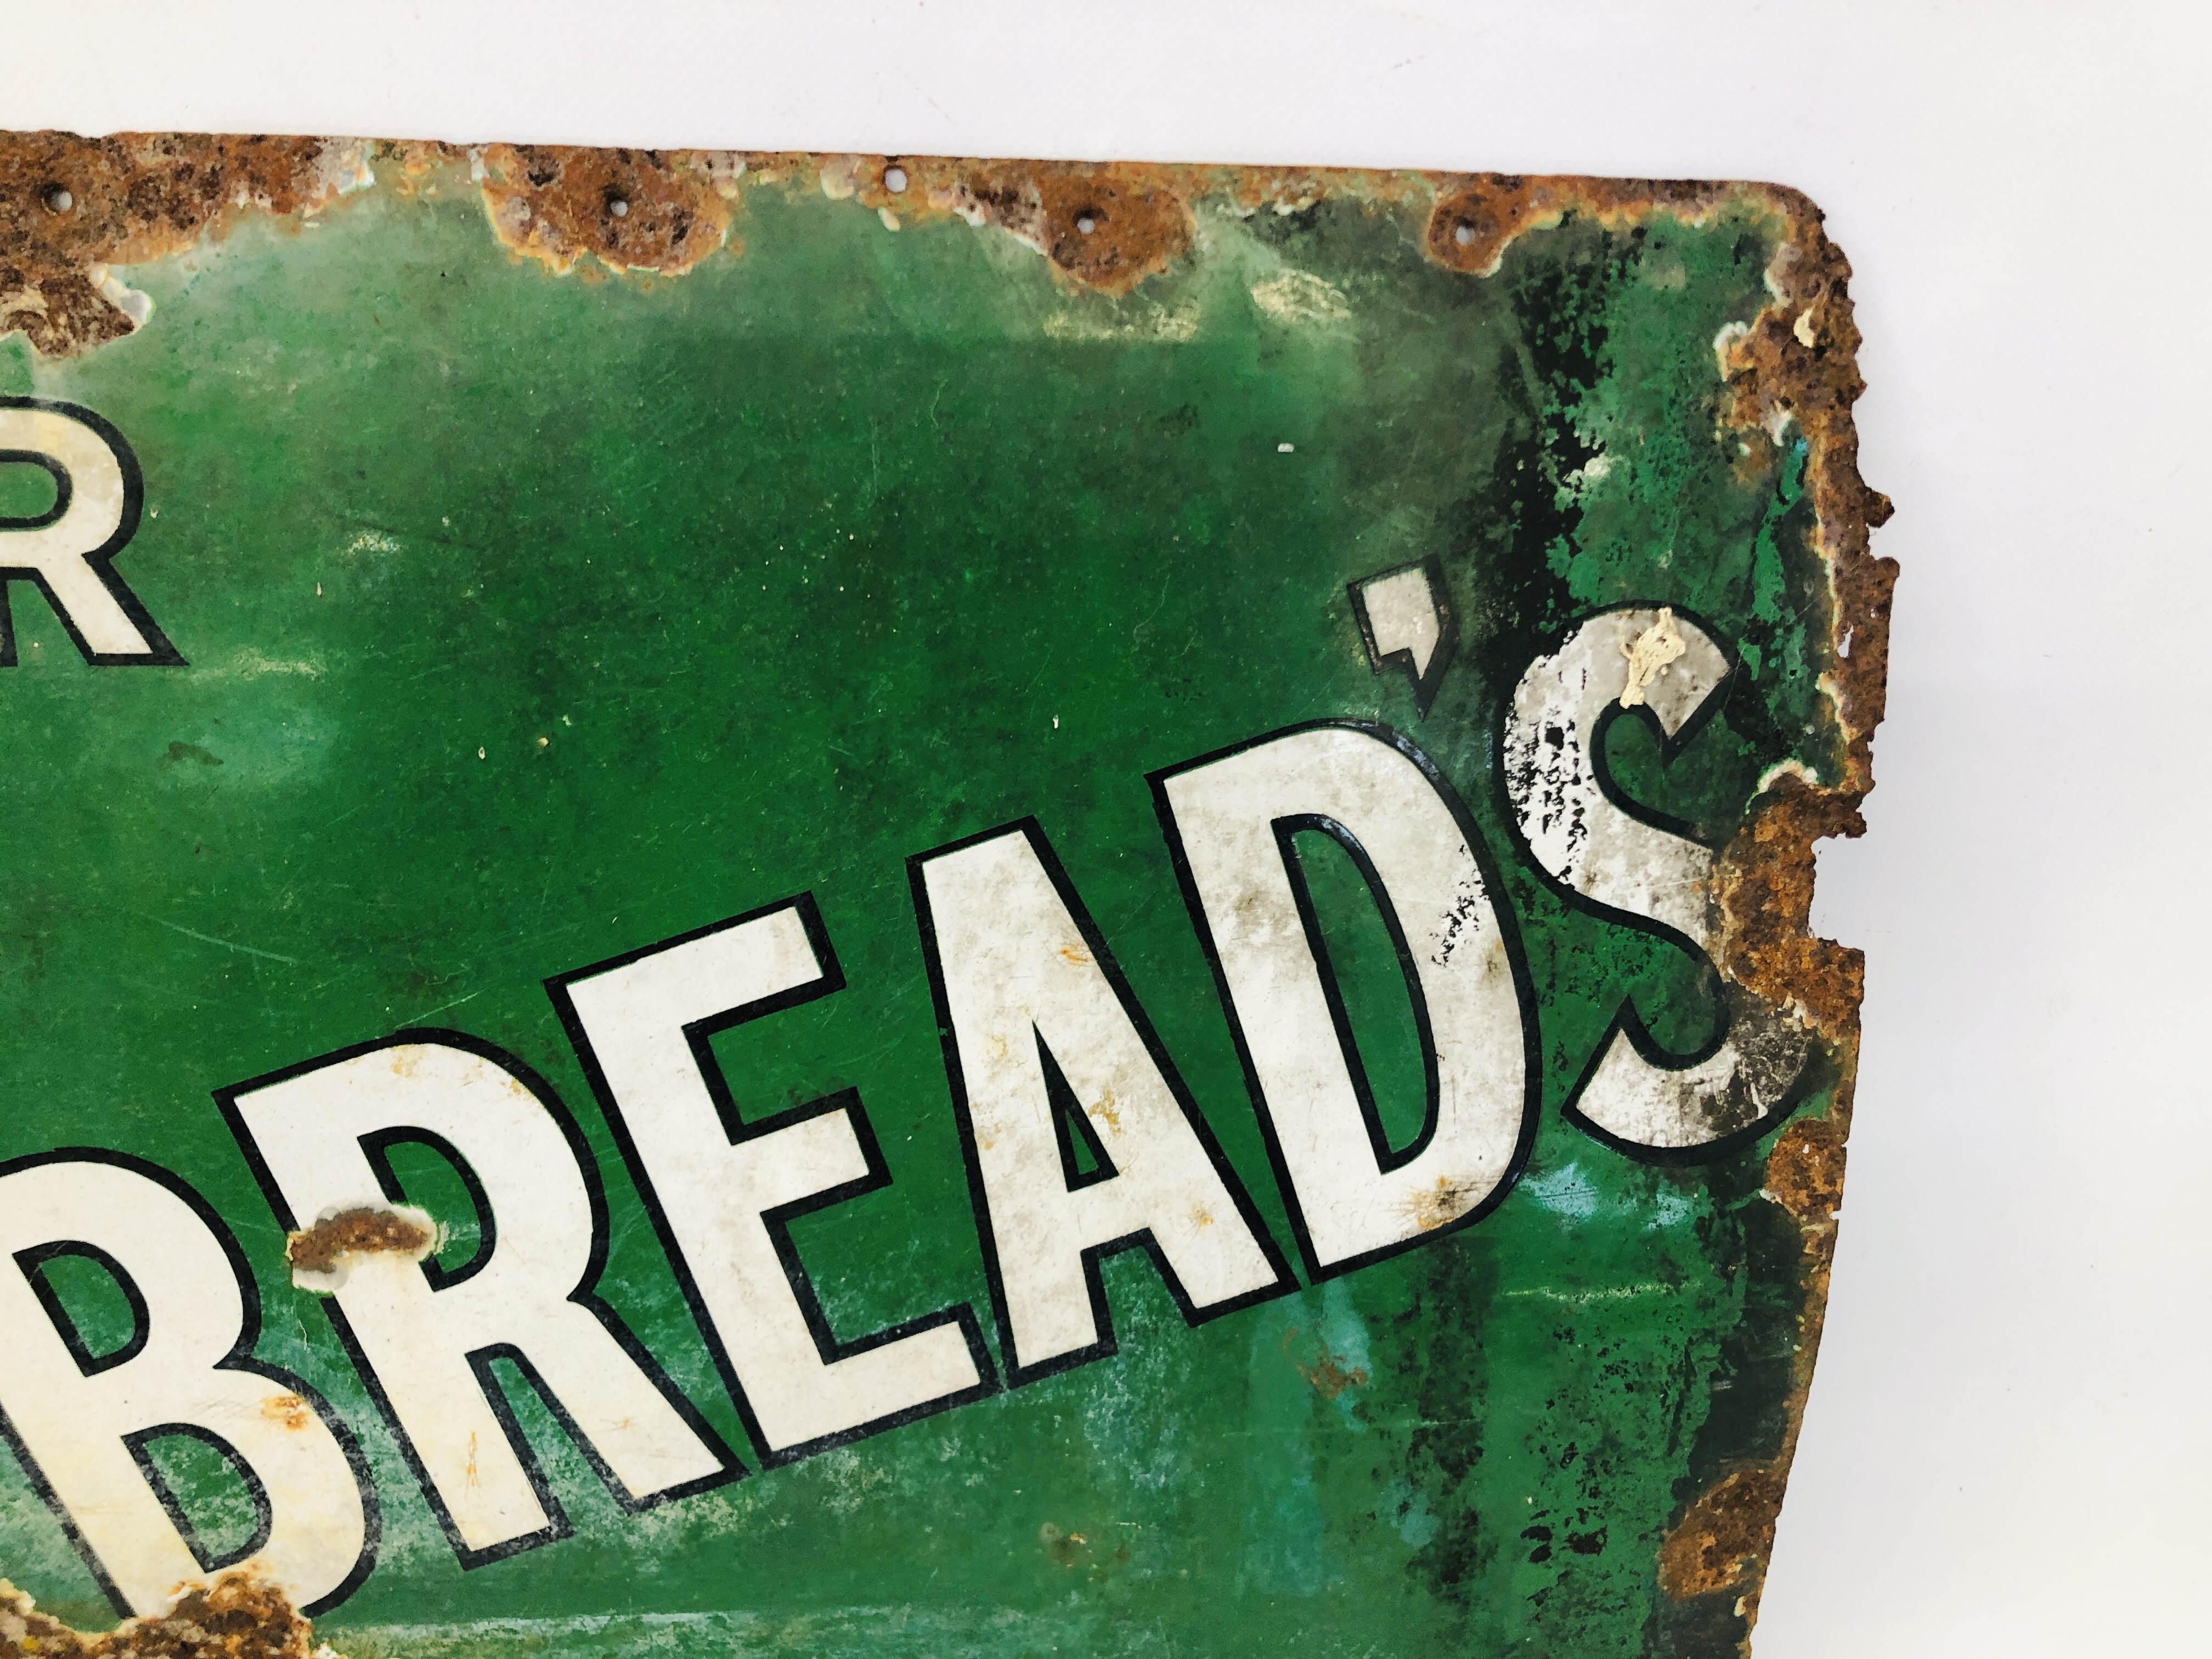 A VINTAGE "ASK FOR WHITBREAD STOUT AND ALE" ENAMEL ADVERTISING SIGN - W 69CM. H 53CM. - Image 3 of 6